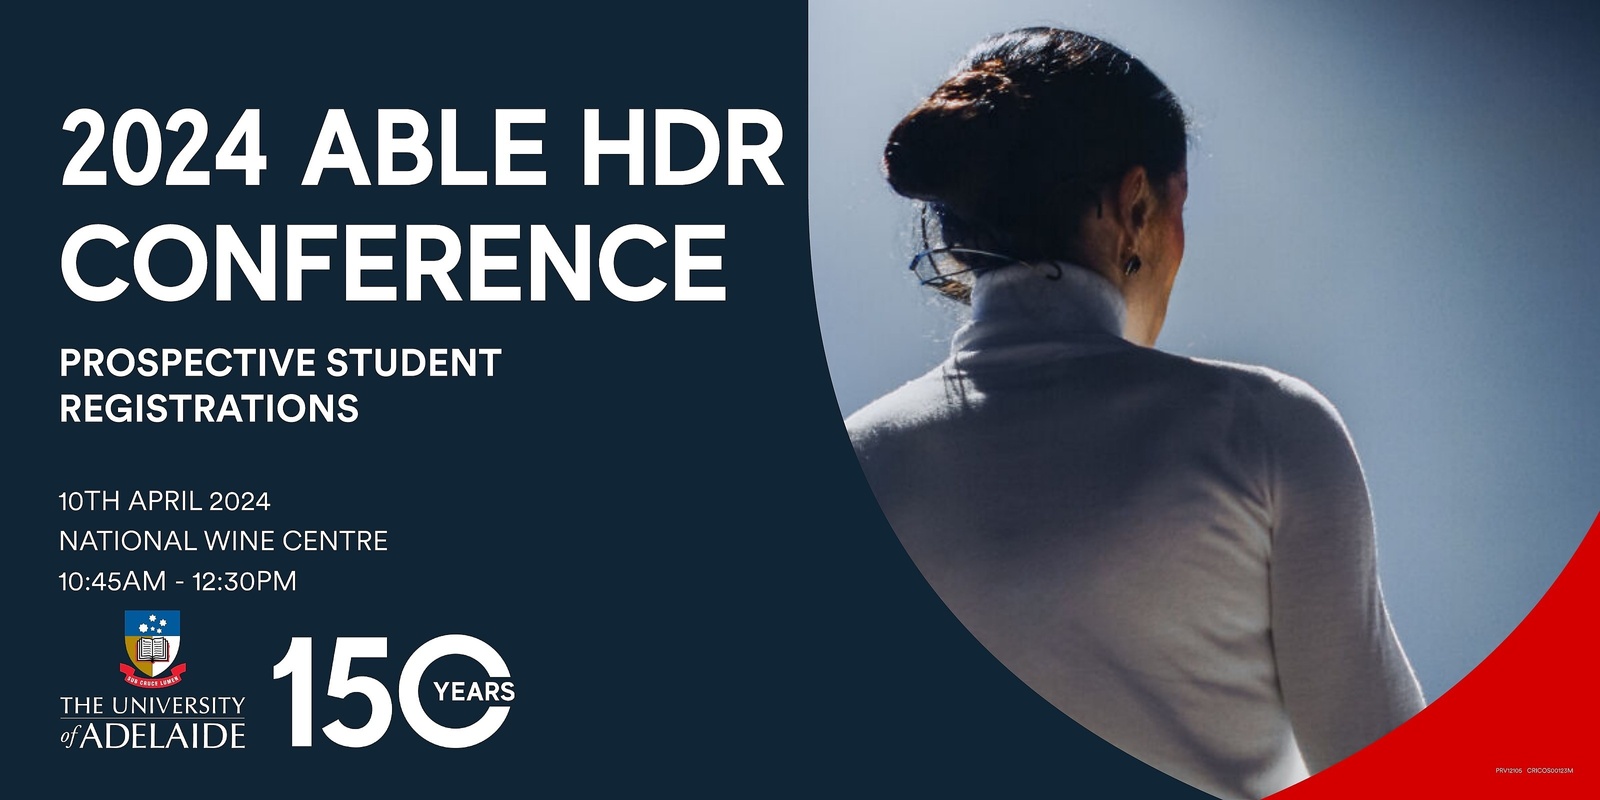 Banner image for 2024 ABLE HDR CONFERENCE - PROSPECTIVE STUDENTS